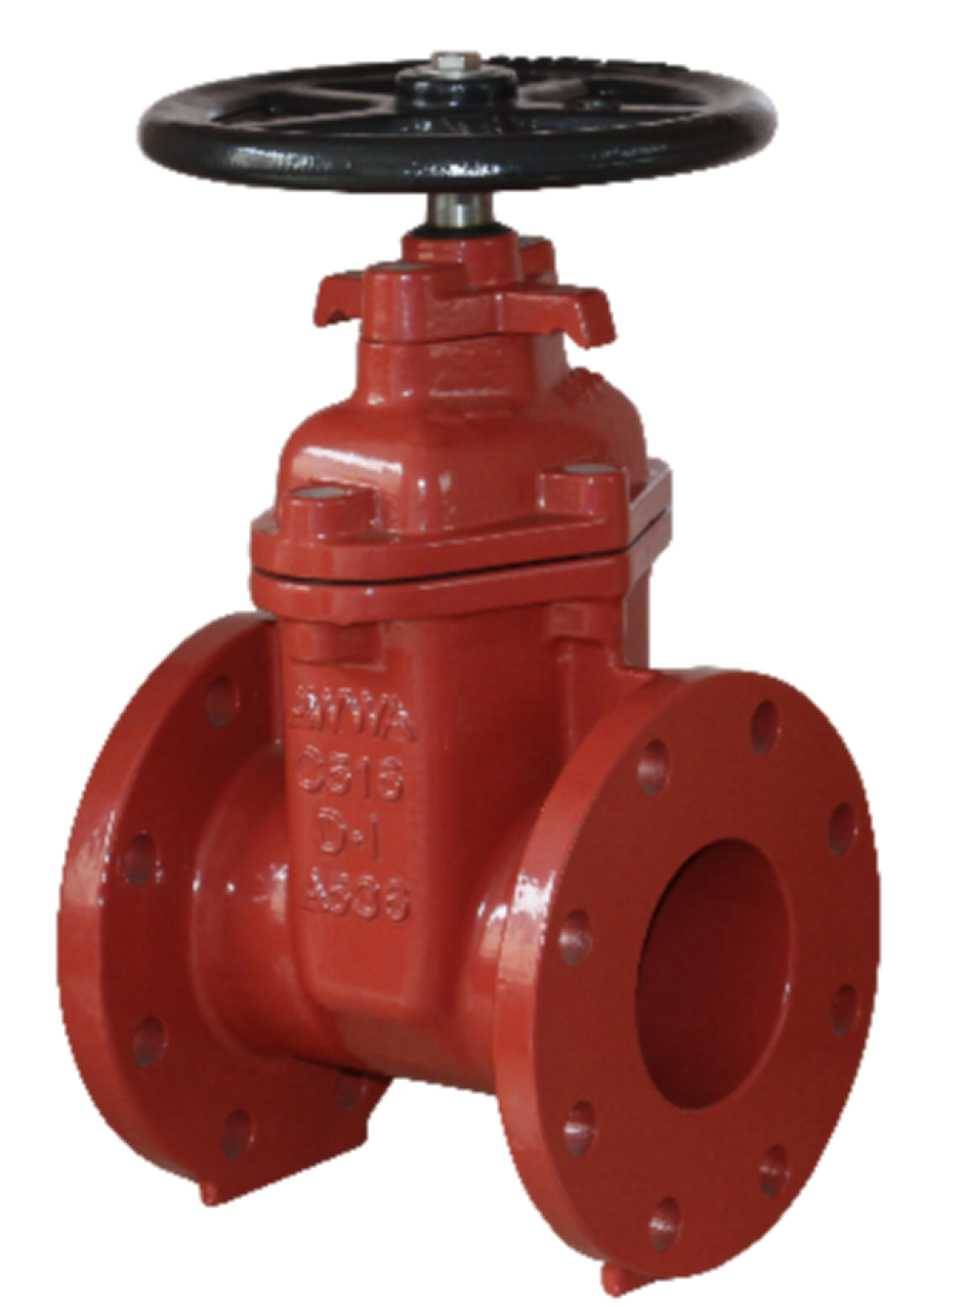 Reliable Supplier Vertical Horizontal Check Valve -
 Flanged End NRS Resilient Seated Gate Valves-AWWA C515 UL FM – Kingnor